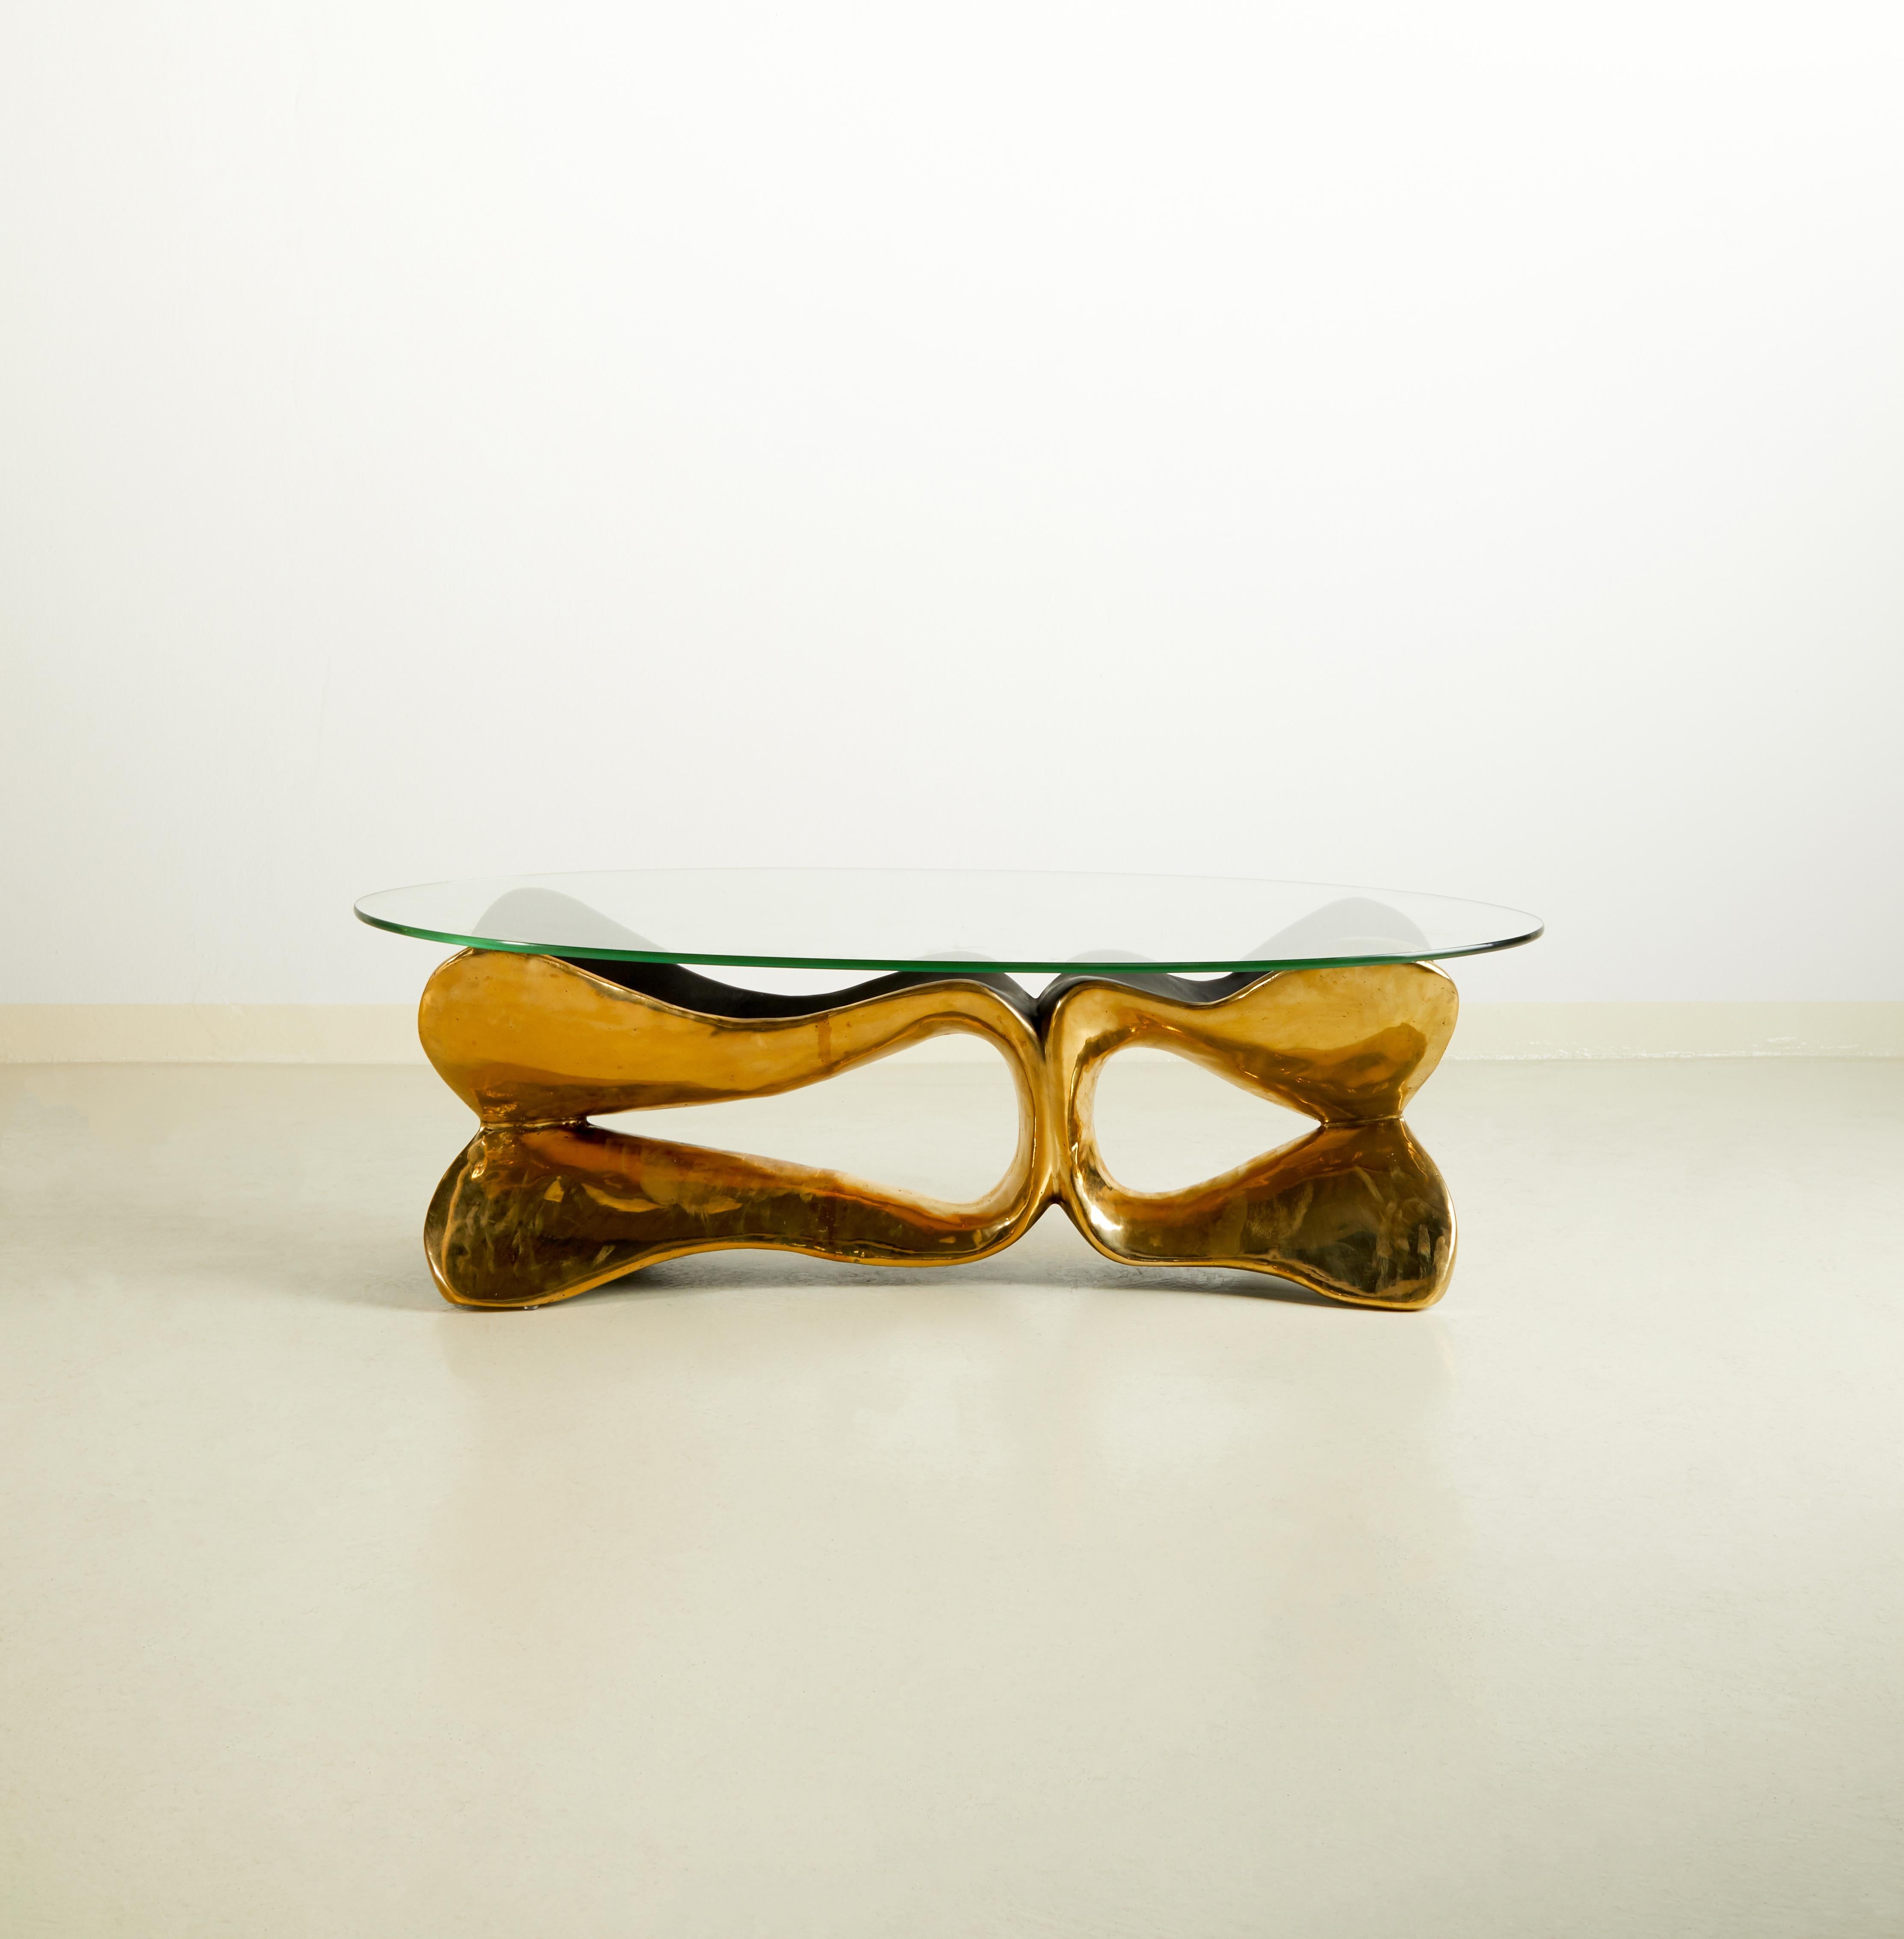 Brass sculpted console table - Homage to Cesar's compression - Misaya
Dimensions: W 100 x L 30 x H 36 cm
Hand-sculpted brass table.
Sold without the glass top.